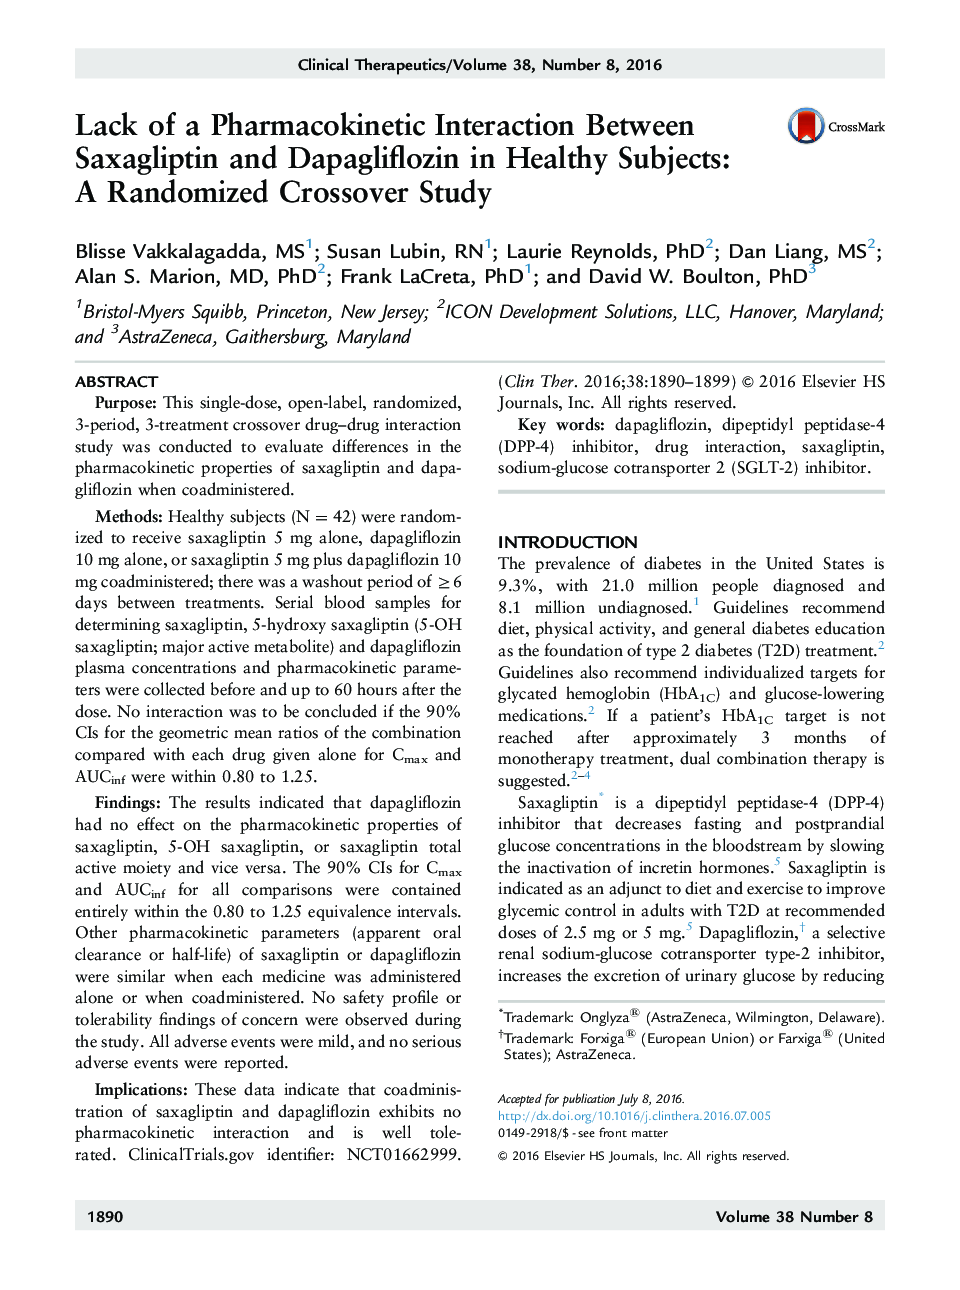 Lack of a Pharmacokinetic Interaction Between Saxagliptin and Dapagliflozin in Healthy Subjects: A Randomized Crossover Study